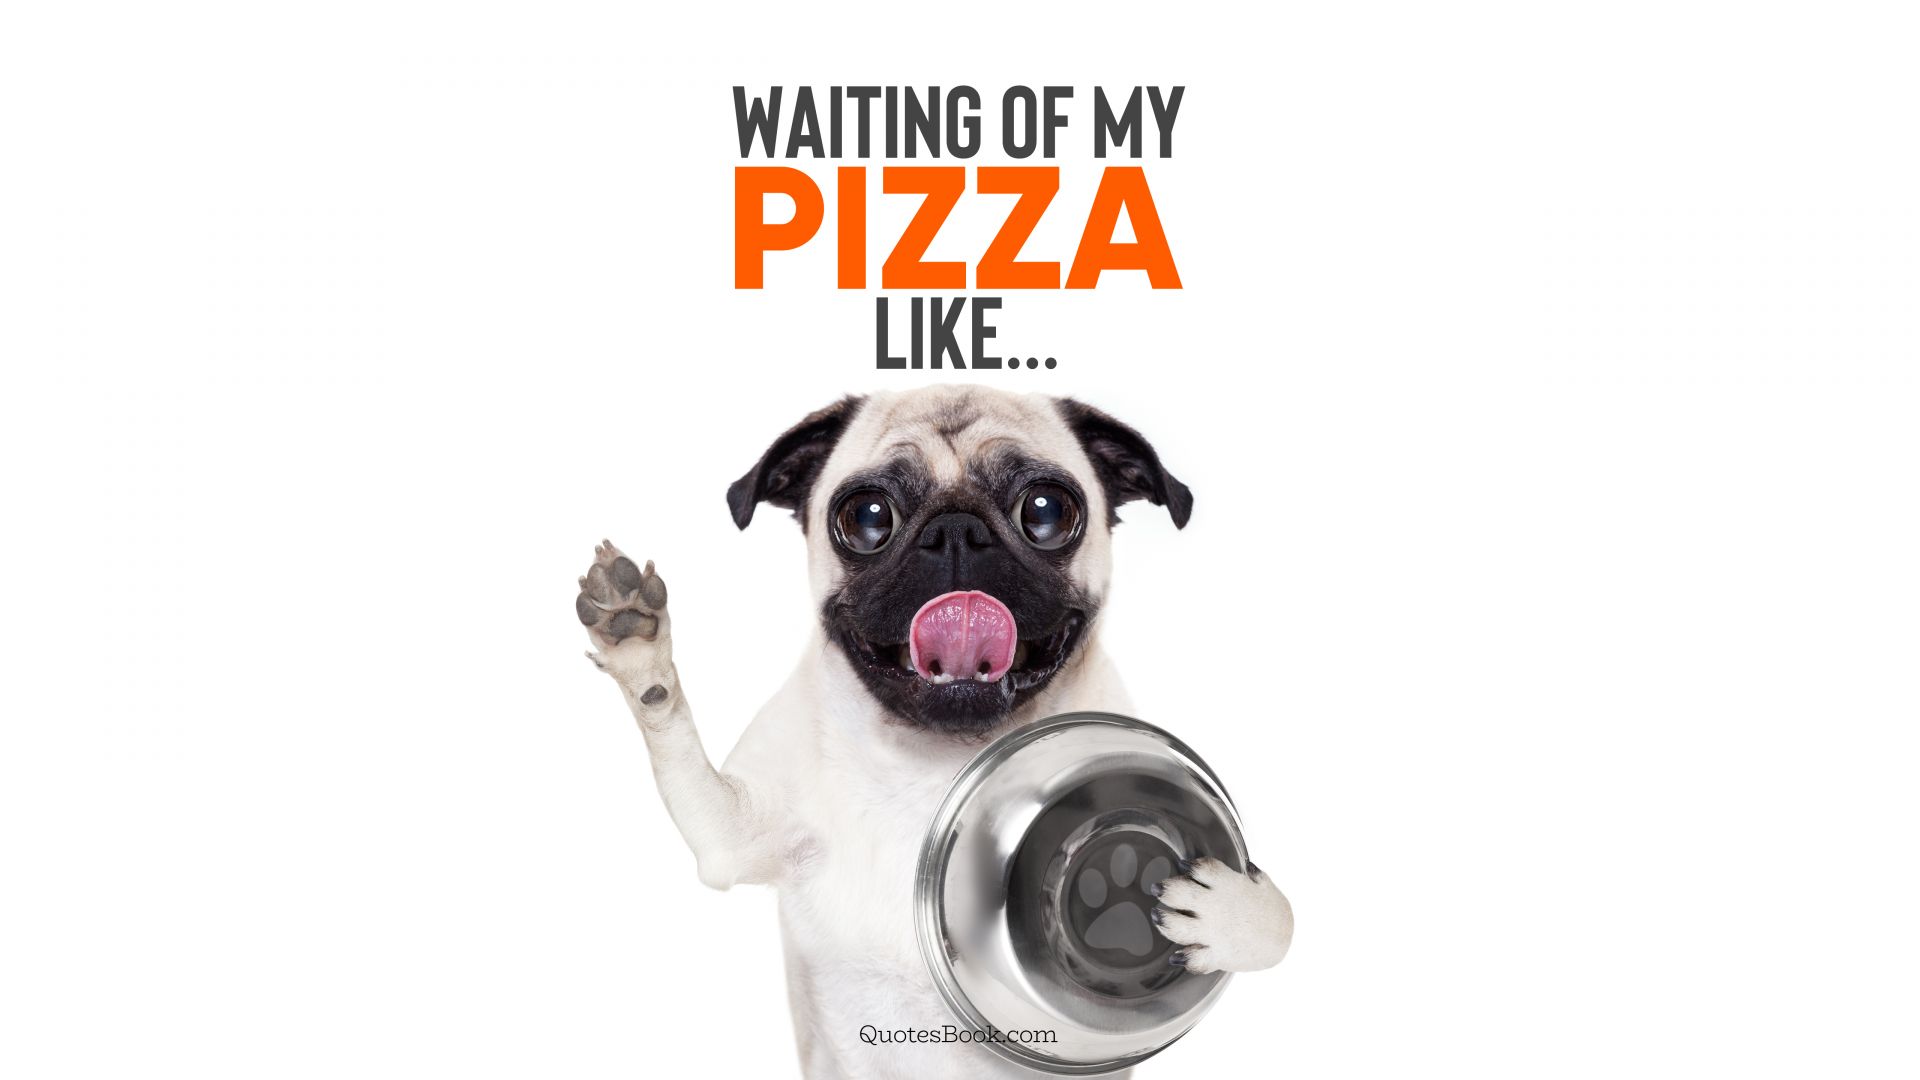 Waiting of my pizza like...